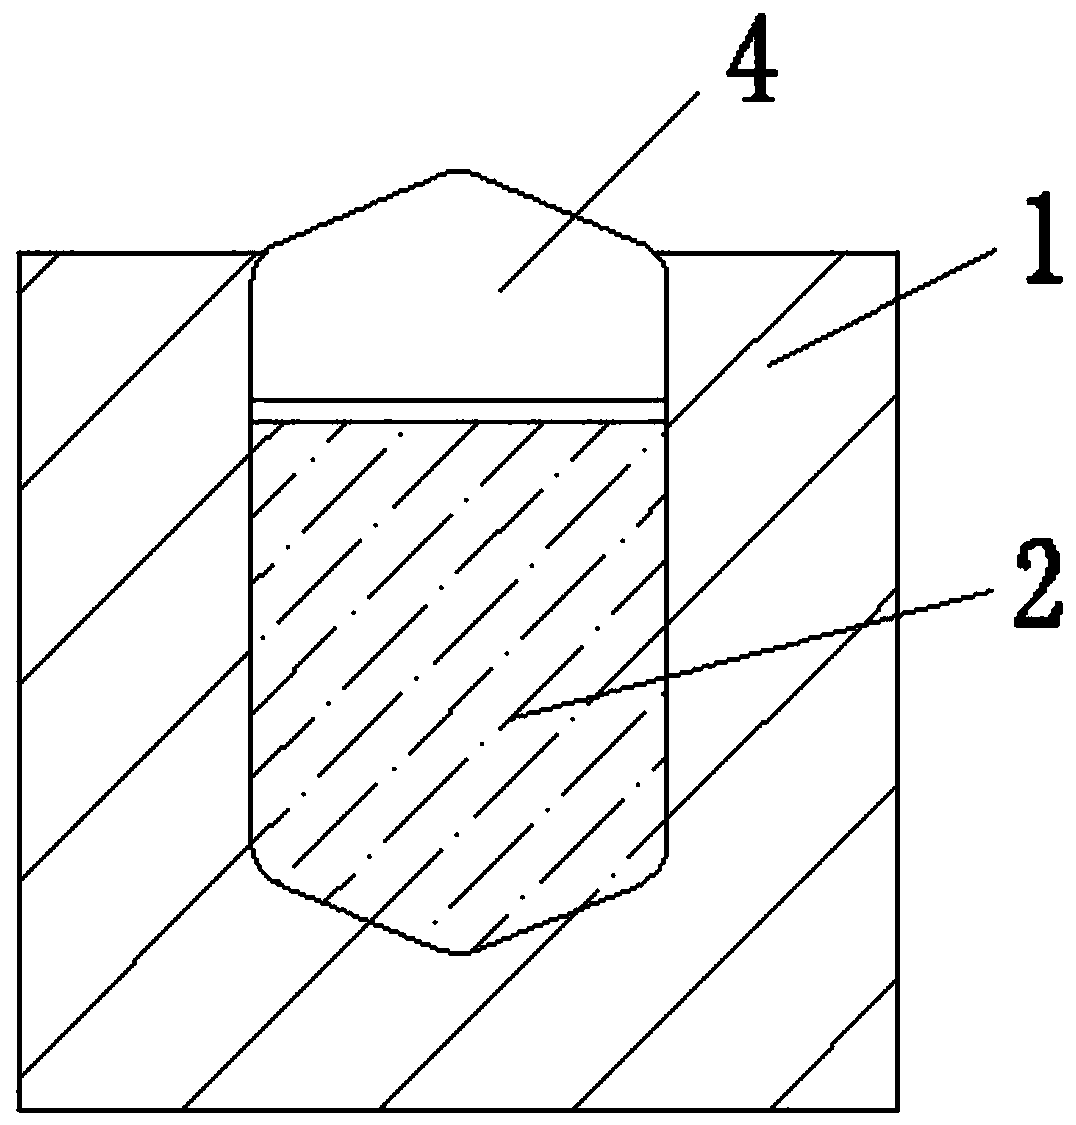 A seamless patch pocket structure